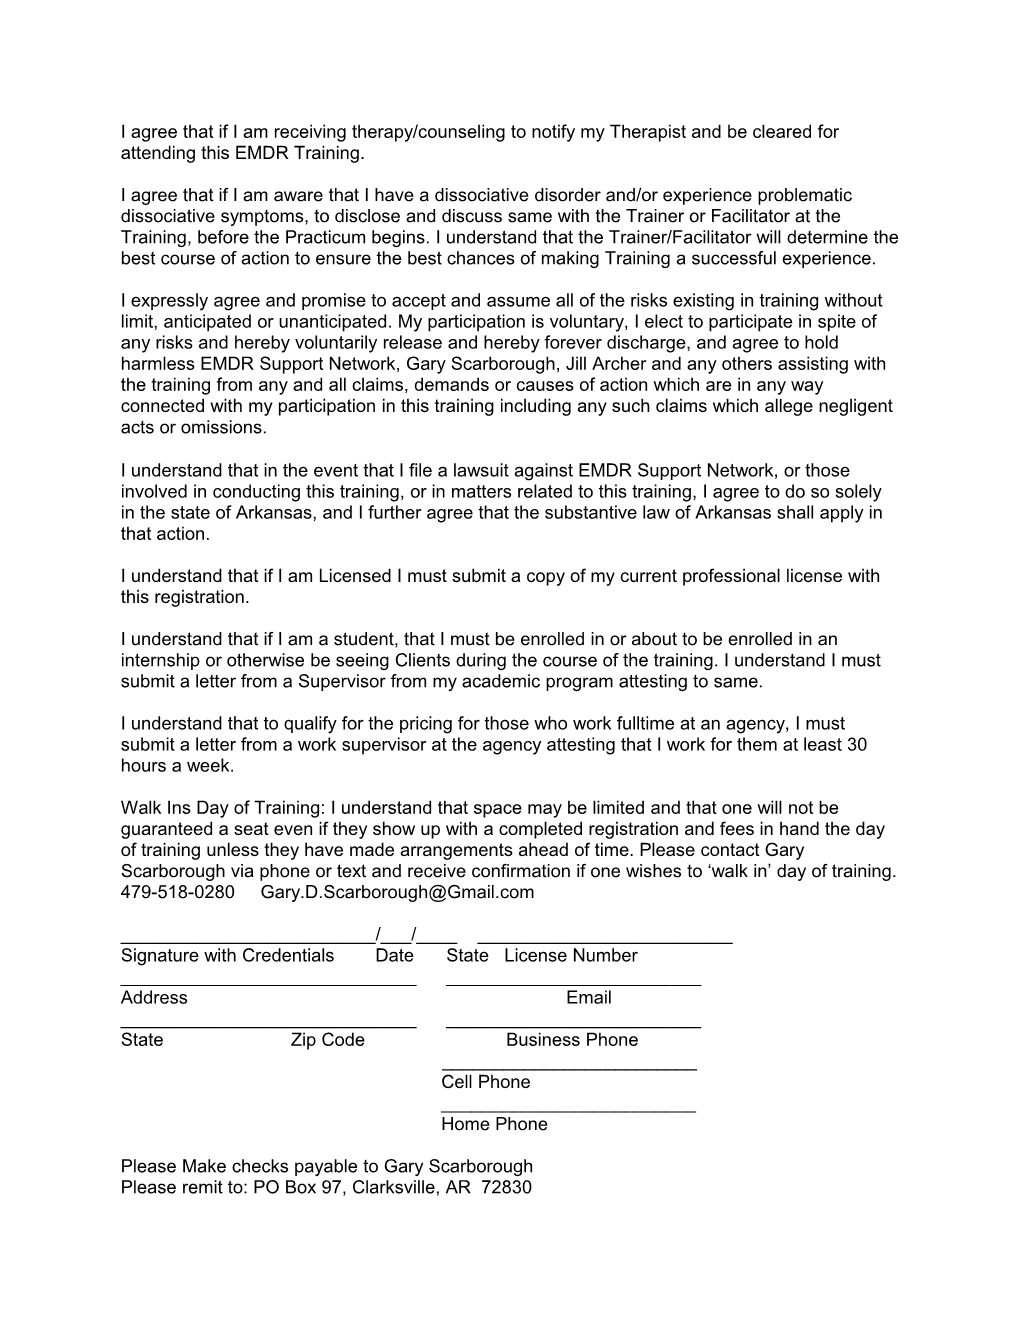 Participation Agreement and Registration Form